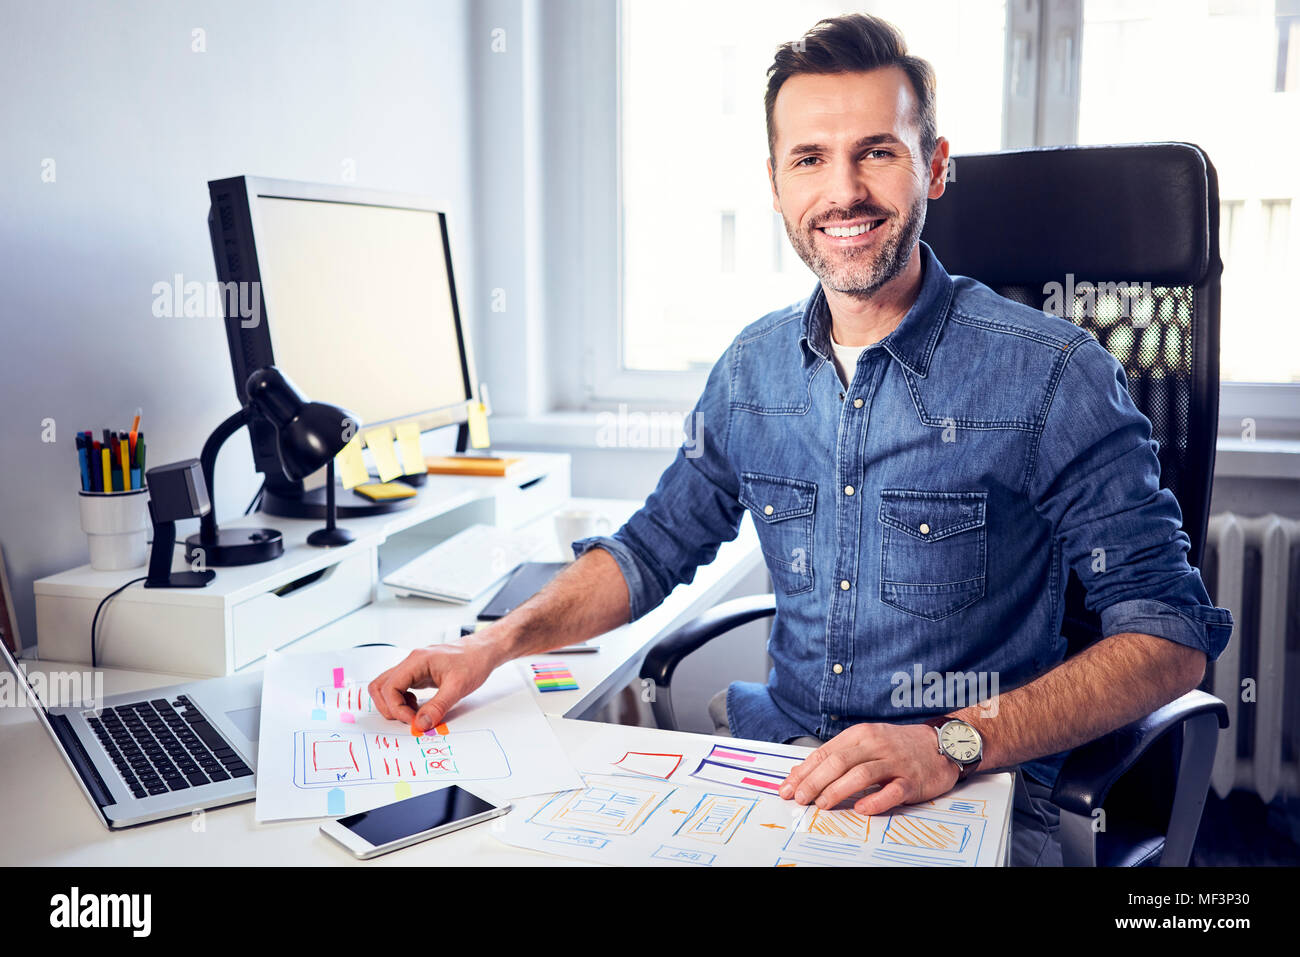 Portrait of smiling web designer working on draft at desk in office Stock Photo